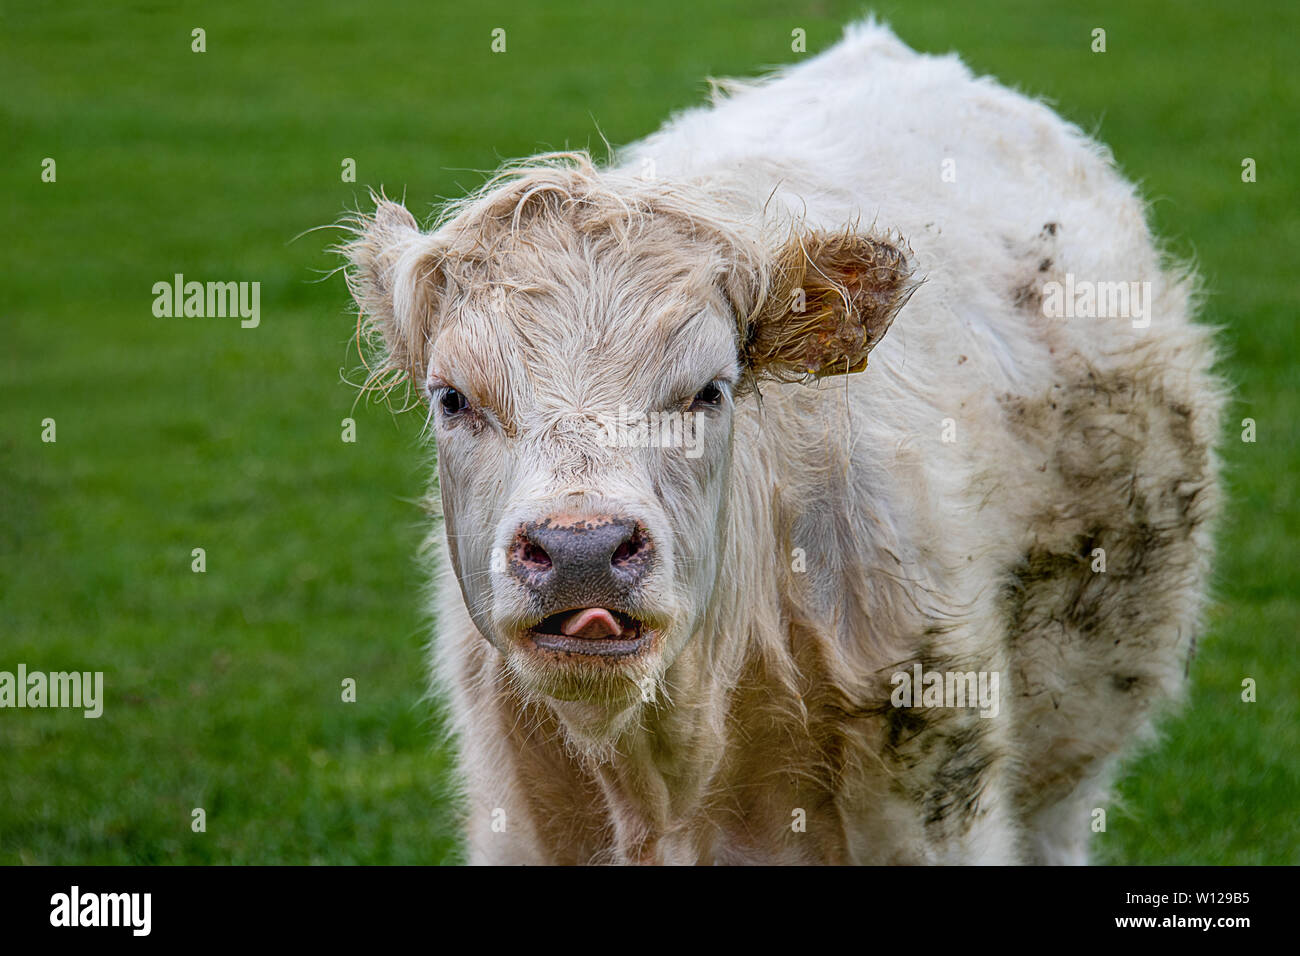 A close up head portrait of a young bullock facing the camera and putting his tongue out Stock Photo